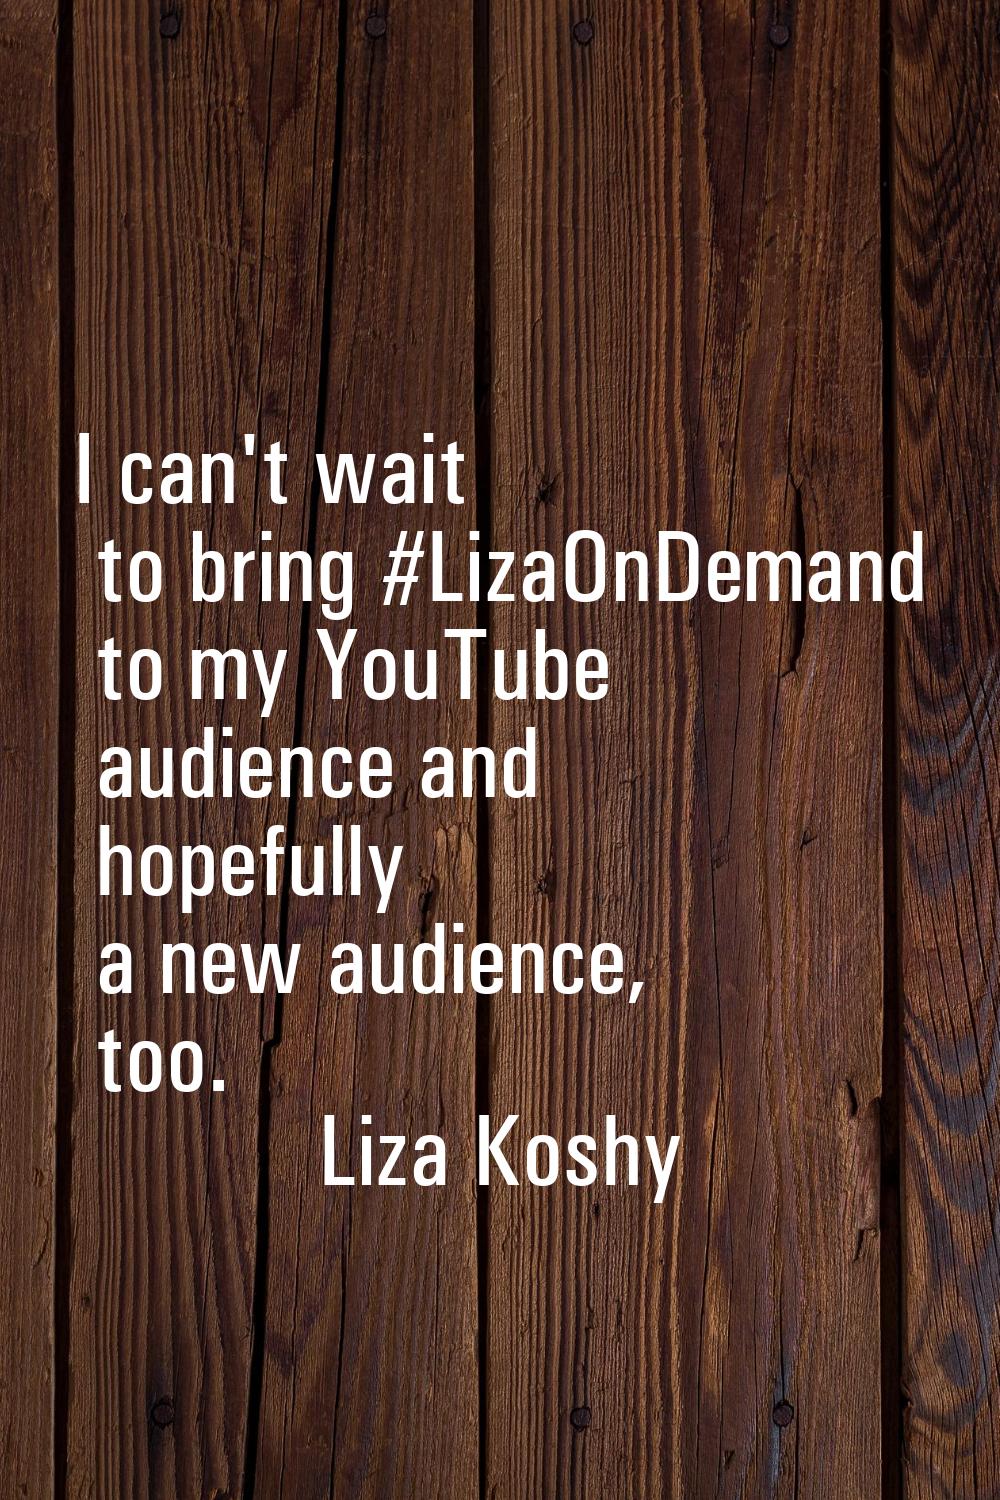 I can't wait to bring #LizaOnDemand to my YouTube audience and hopefully a new audience, too.